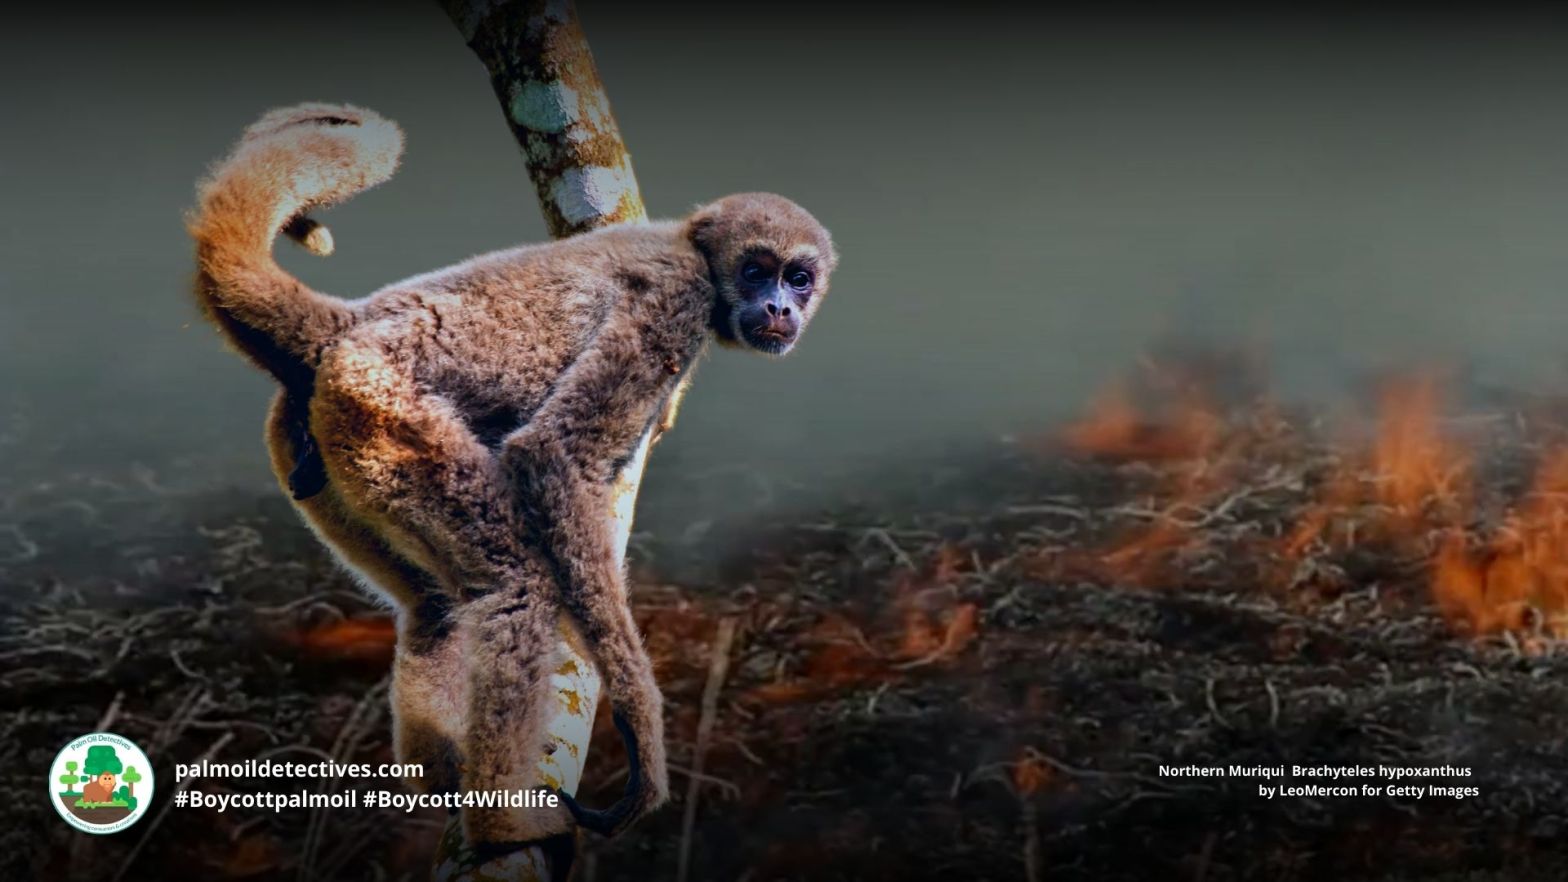 Critically Endangered species – Palm Oil Detectives